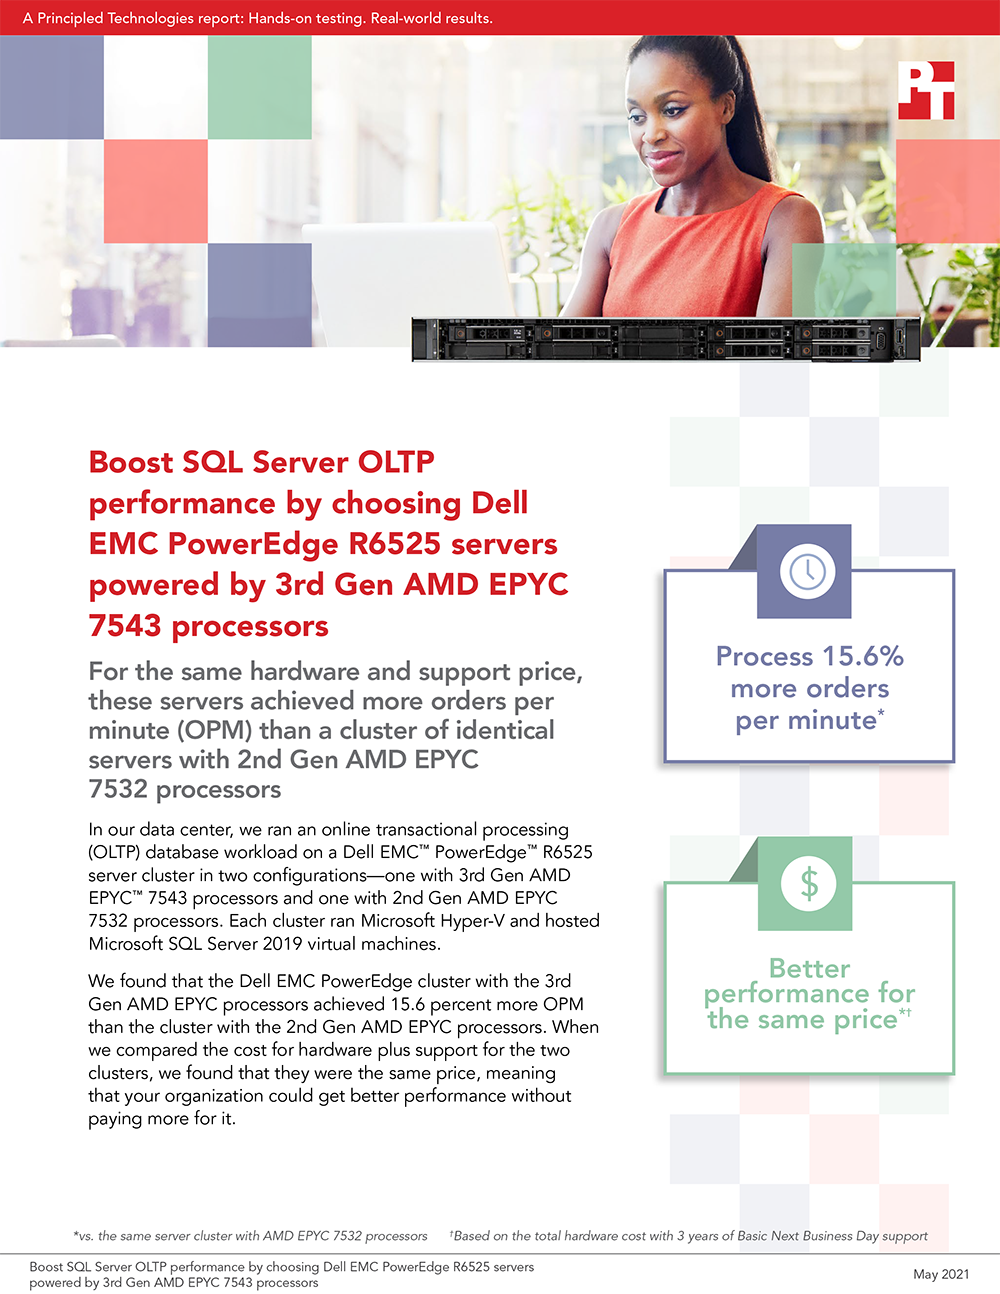 Principled Technologies Publishes Comparison Study on SQL Server OLTP Performance from Two Configurations of Dell EMC PowerEdge R6525 Servers